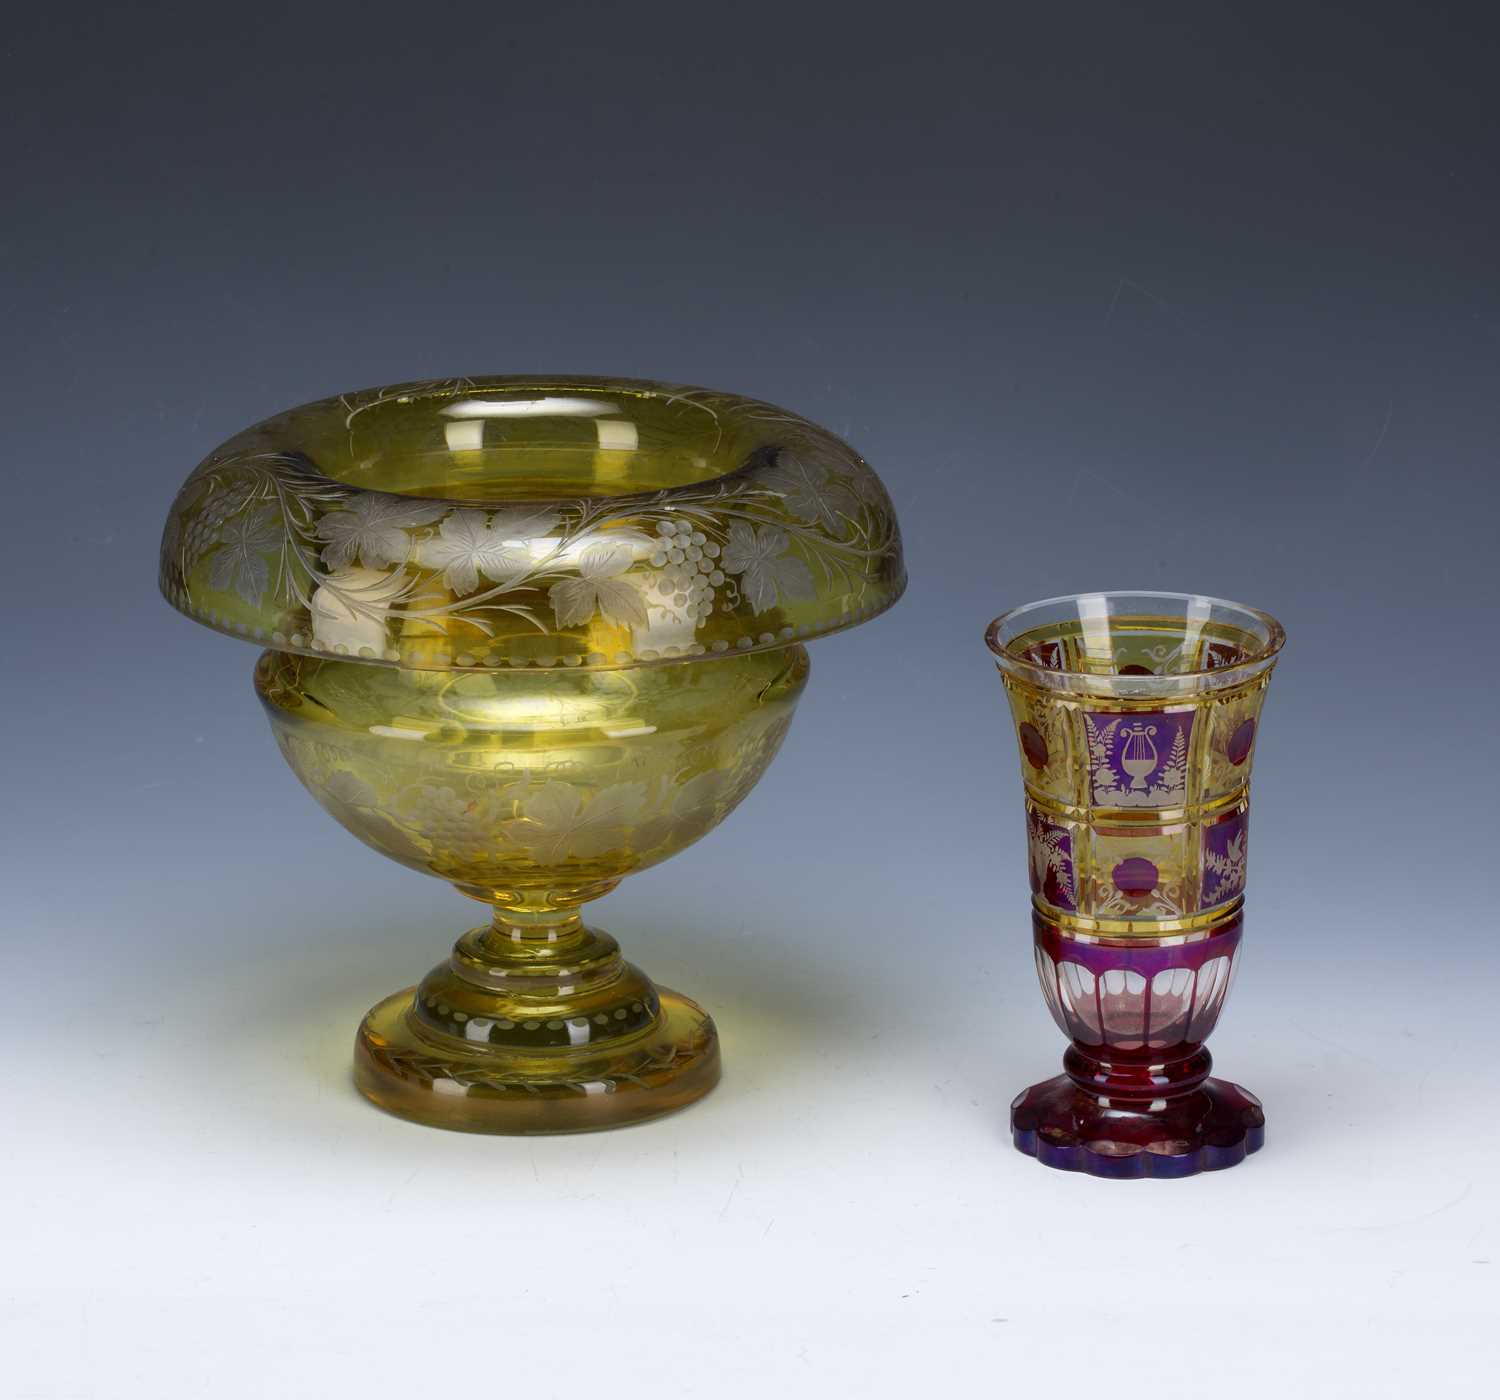 Two pieces of Bohemian glass one a flashed glass vase with red, yellow and clear glass colouring,